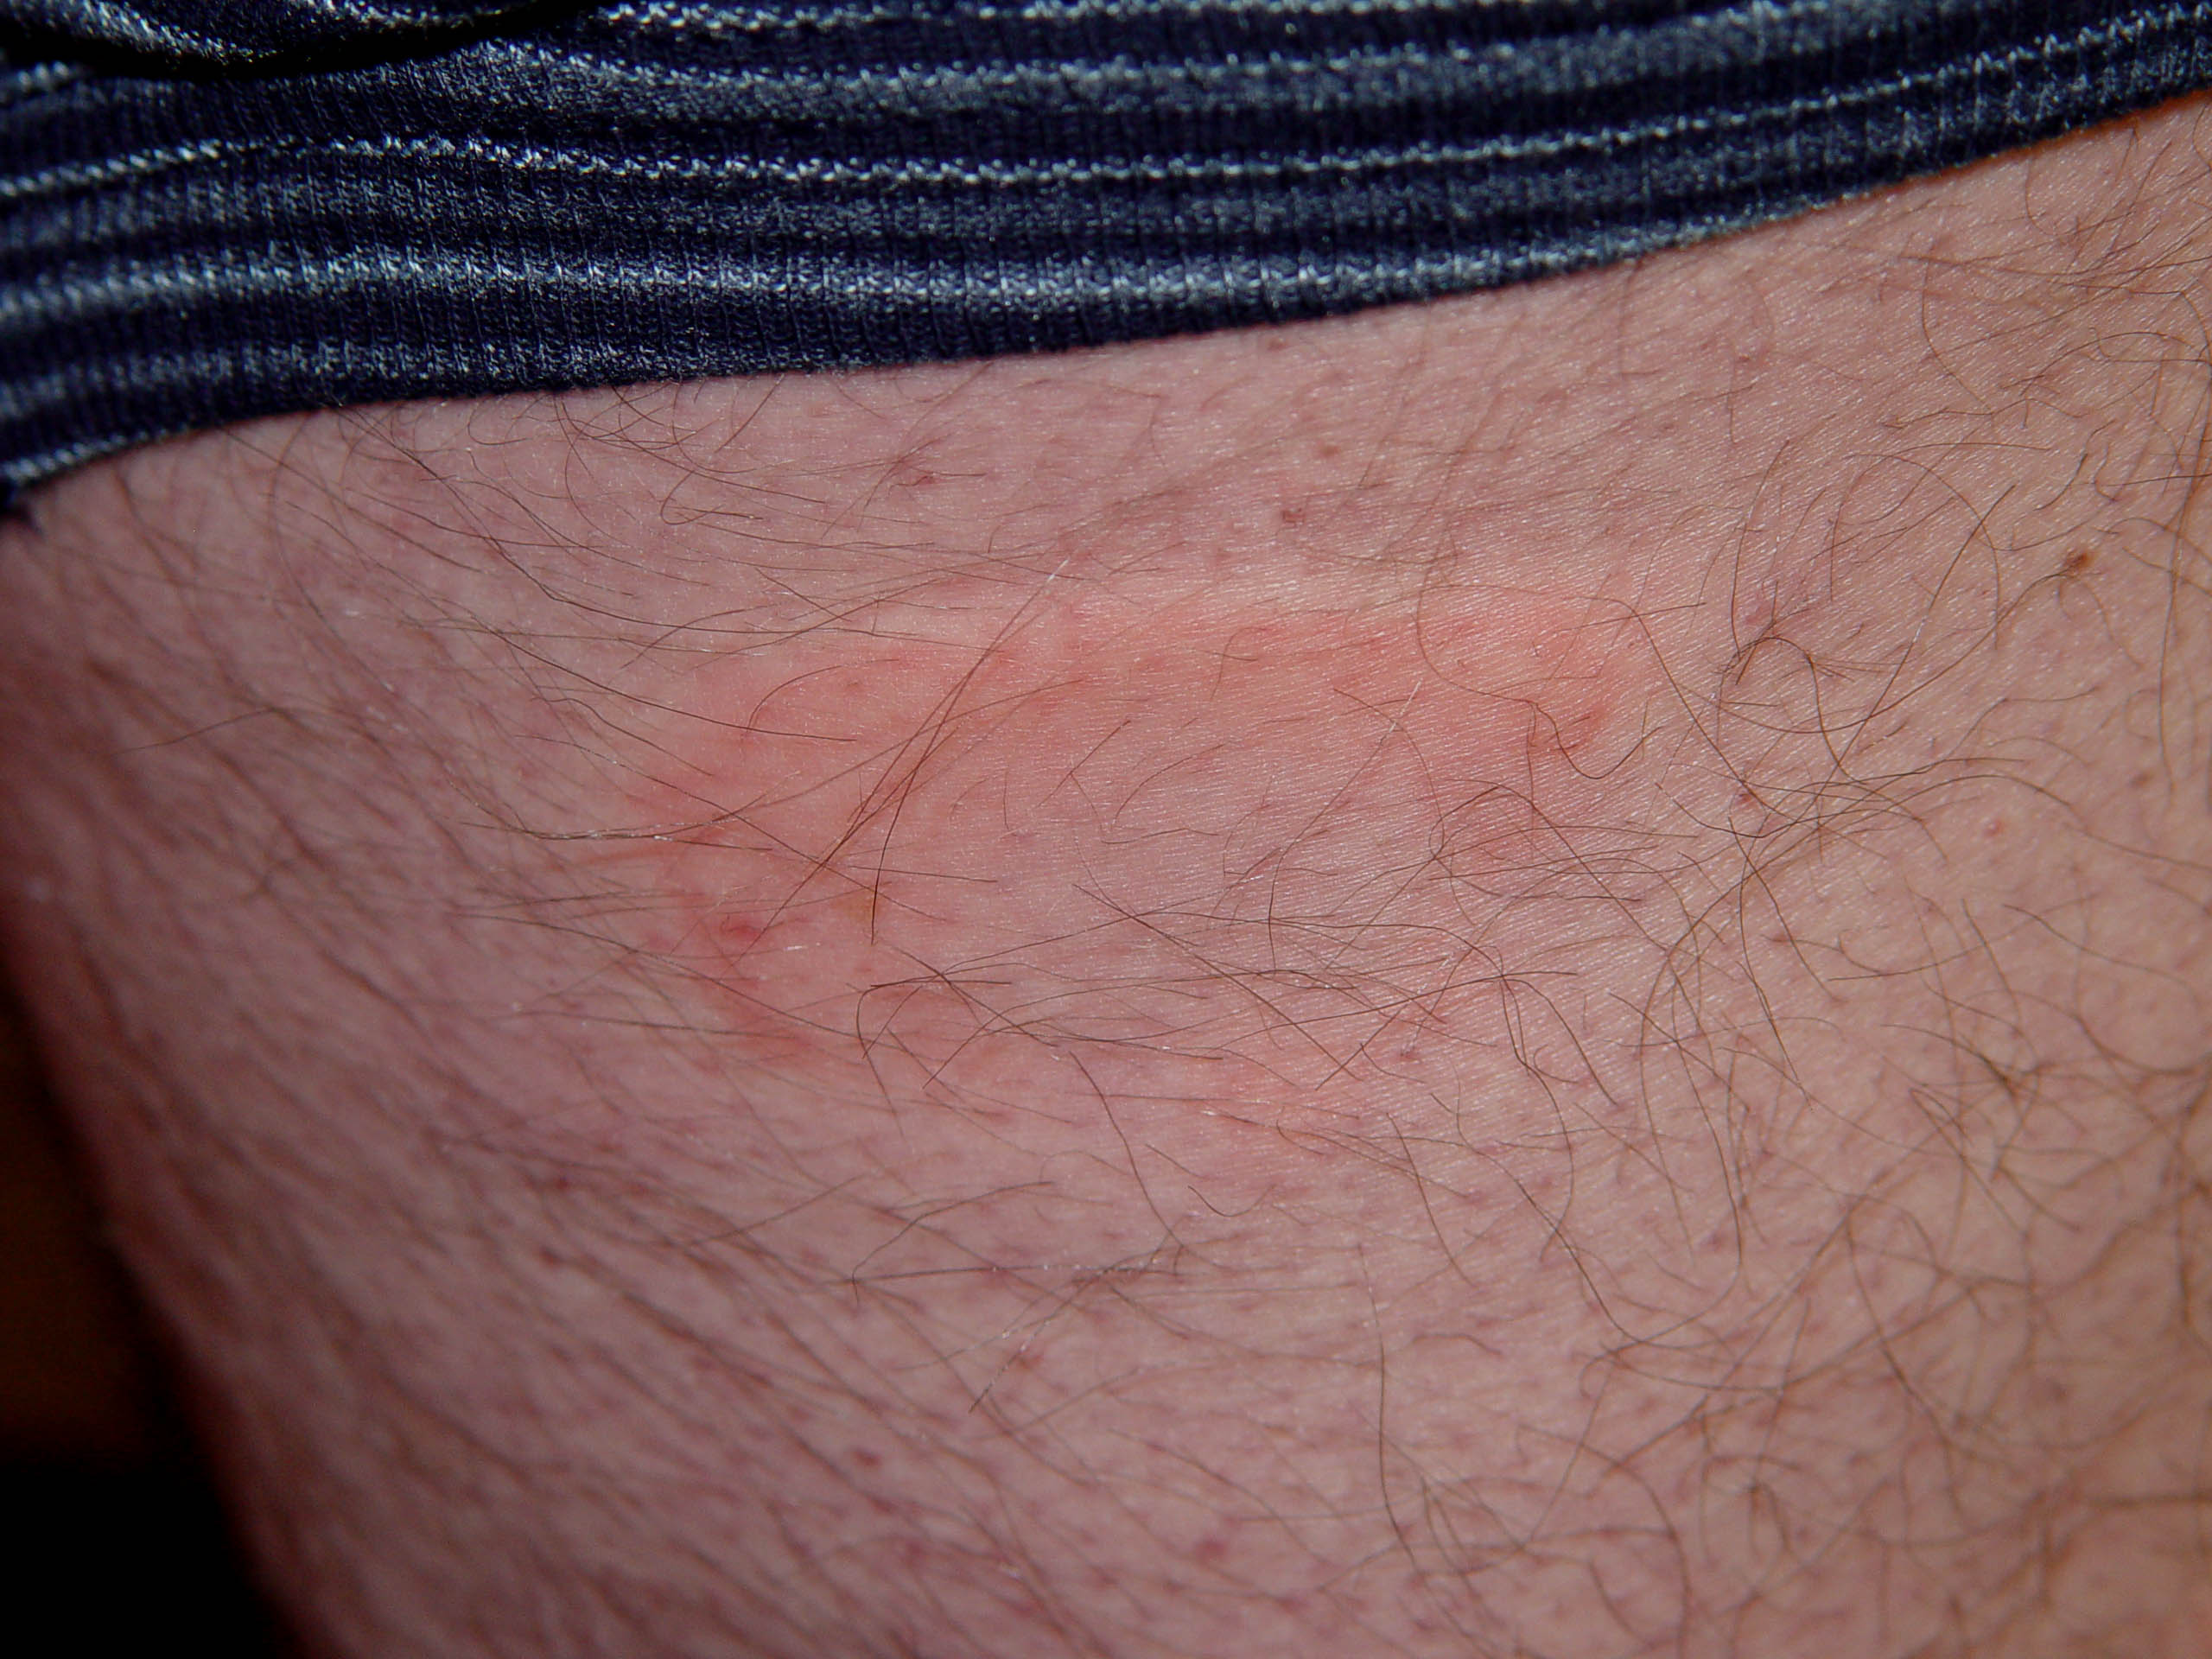 What Are the Causes, Symptoms and Treatment for Hives?